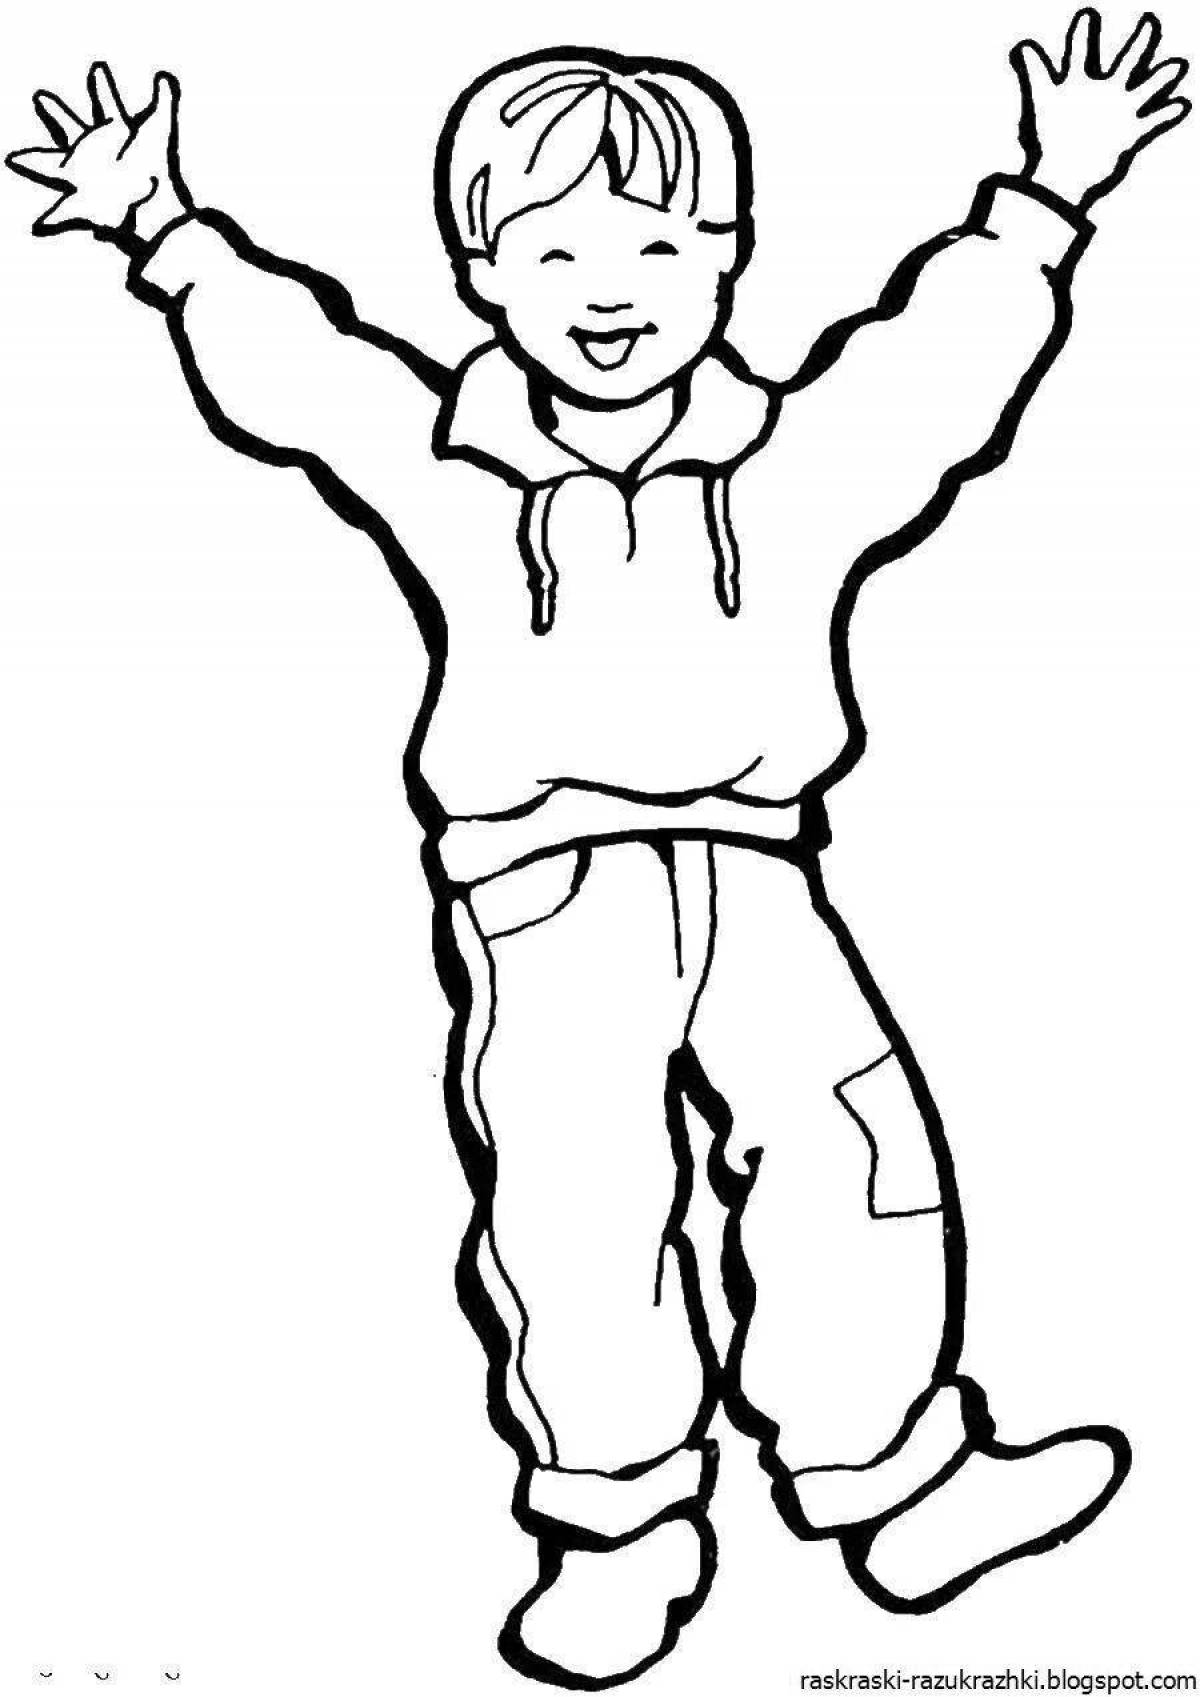 Animated coloring pages people for preschoolers